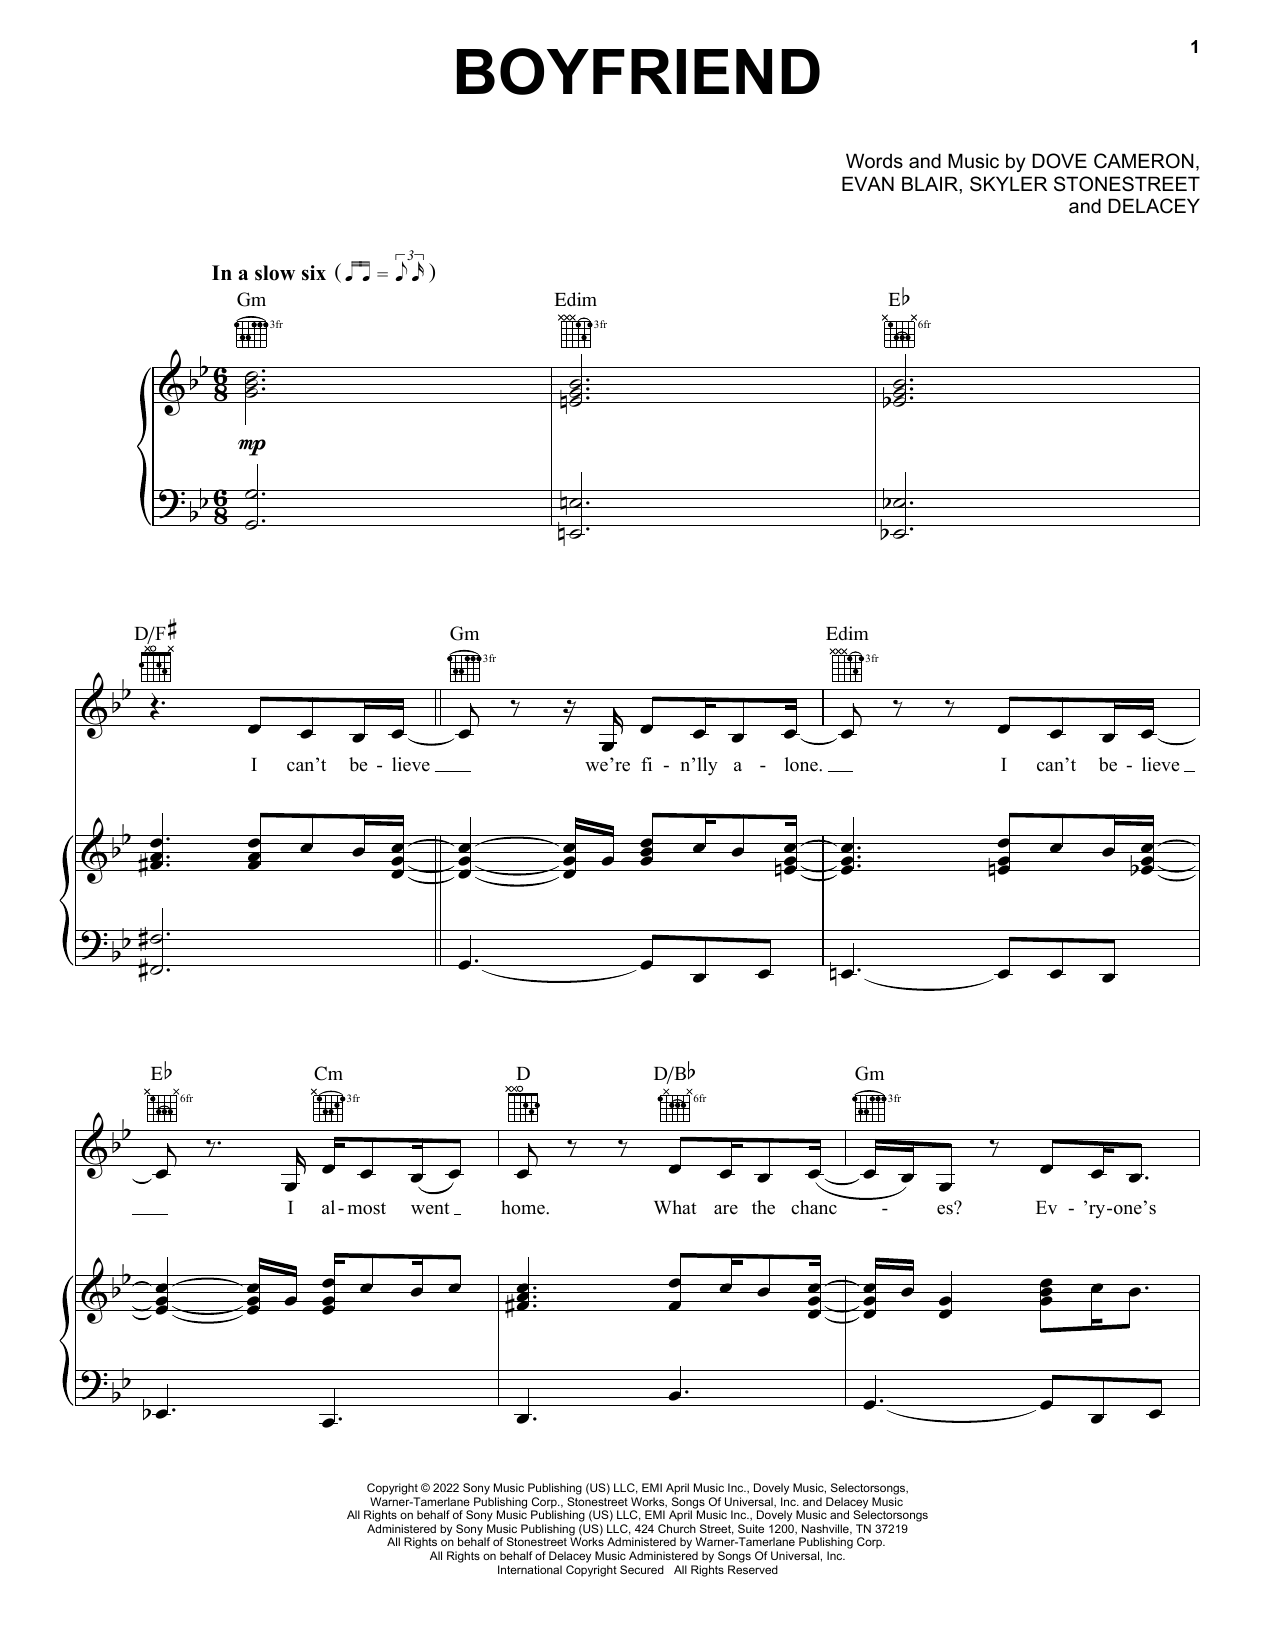 Dove Cameron Boyfriend sheet music notes and chords. Download Printable PDF.